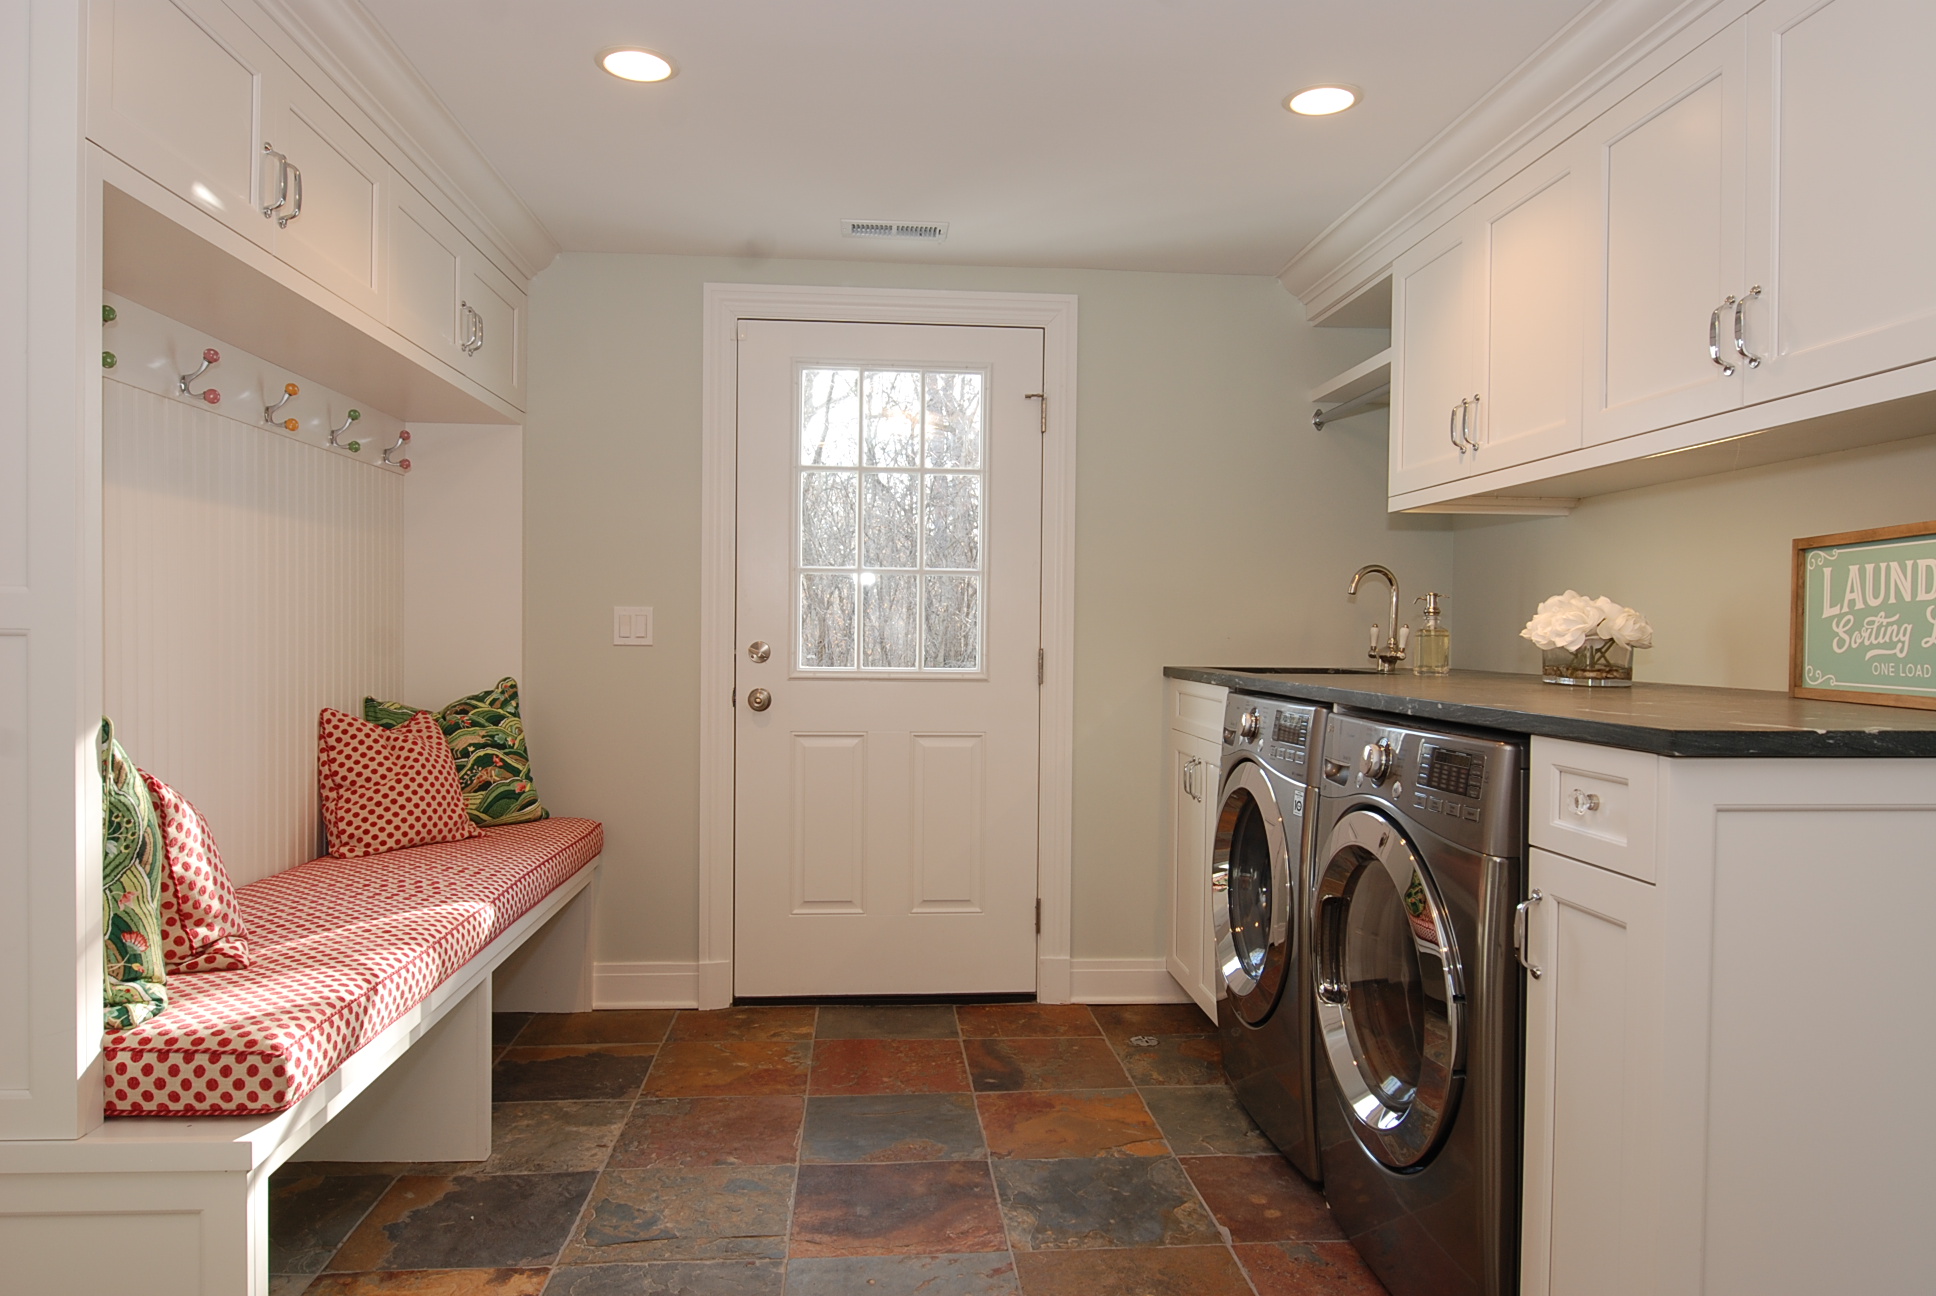 Laundry Room Trends for 2019